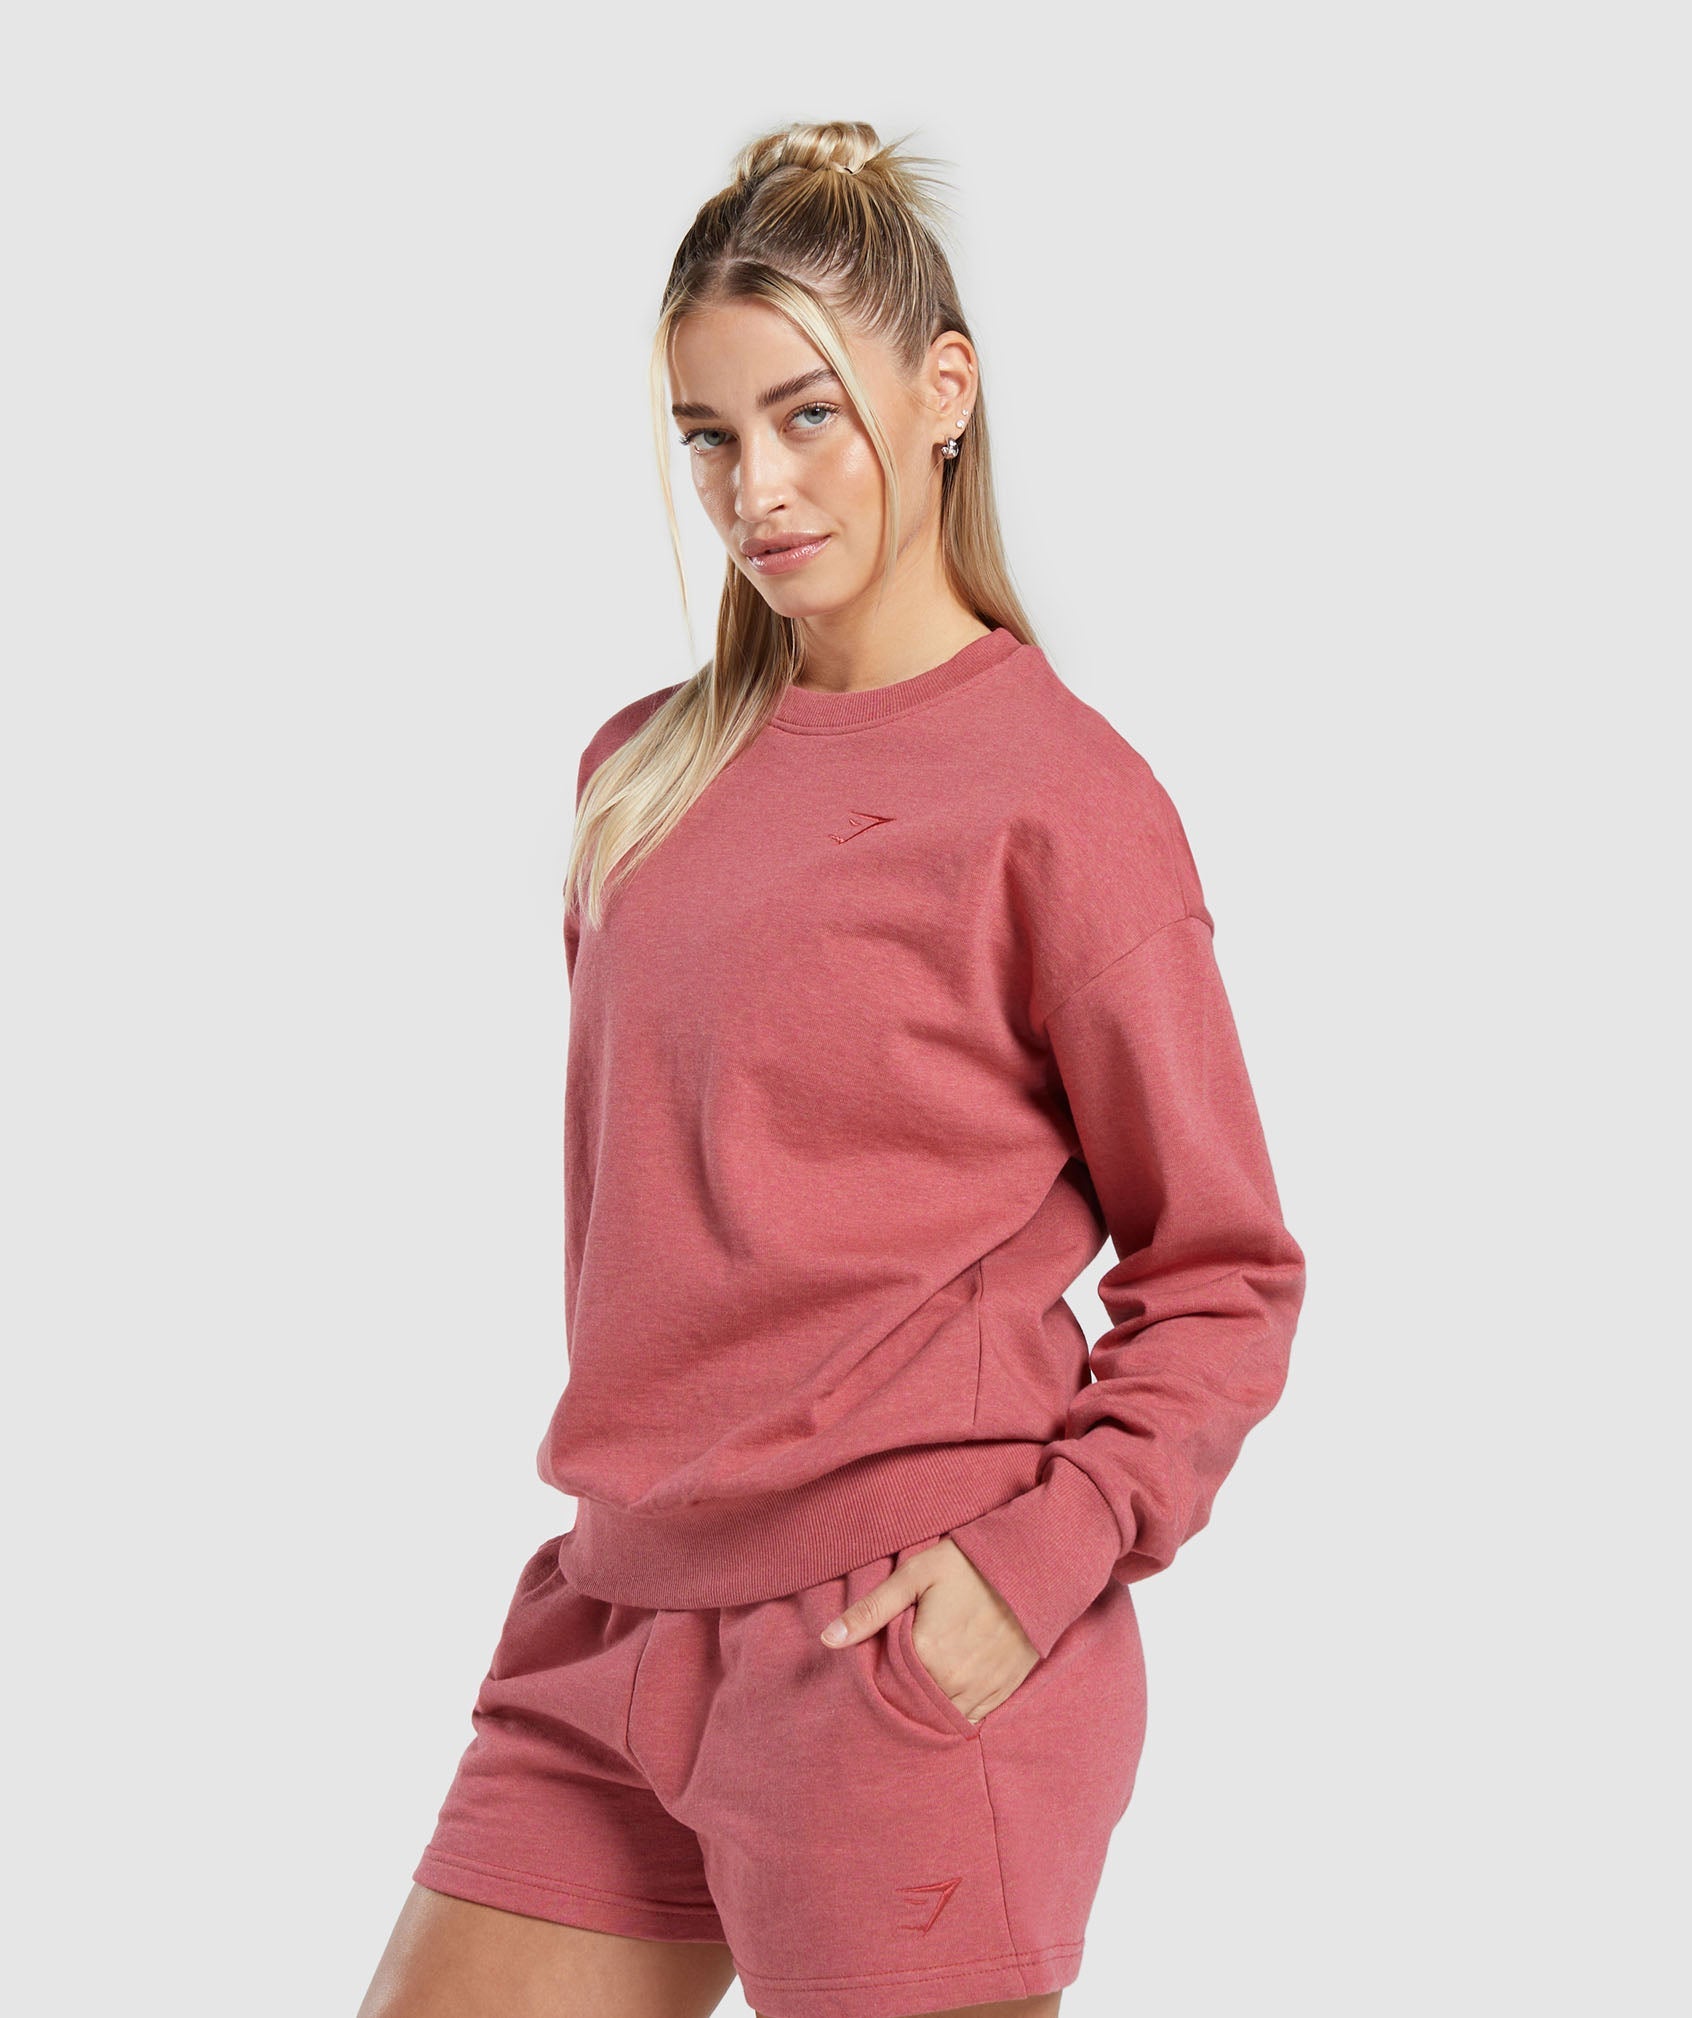 Rest Day Sweats Crew in Heritage Pink Marl - view 3